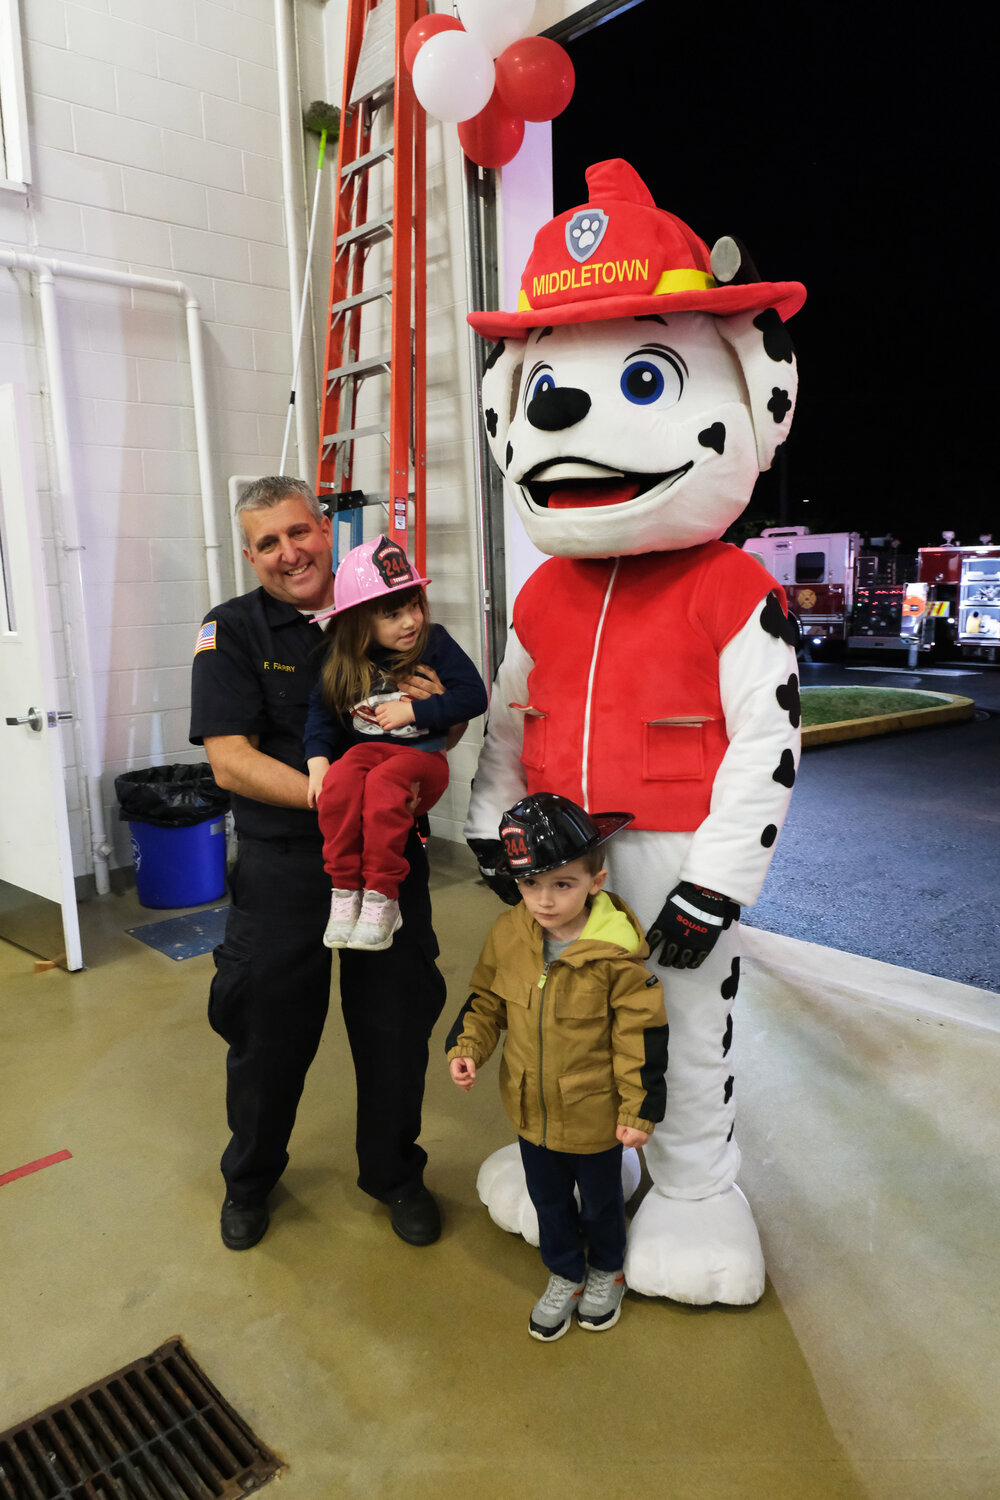 Fire Chief and PA Senator Frank Farry poses with his children and Marshall from Paw Patrol.